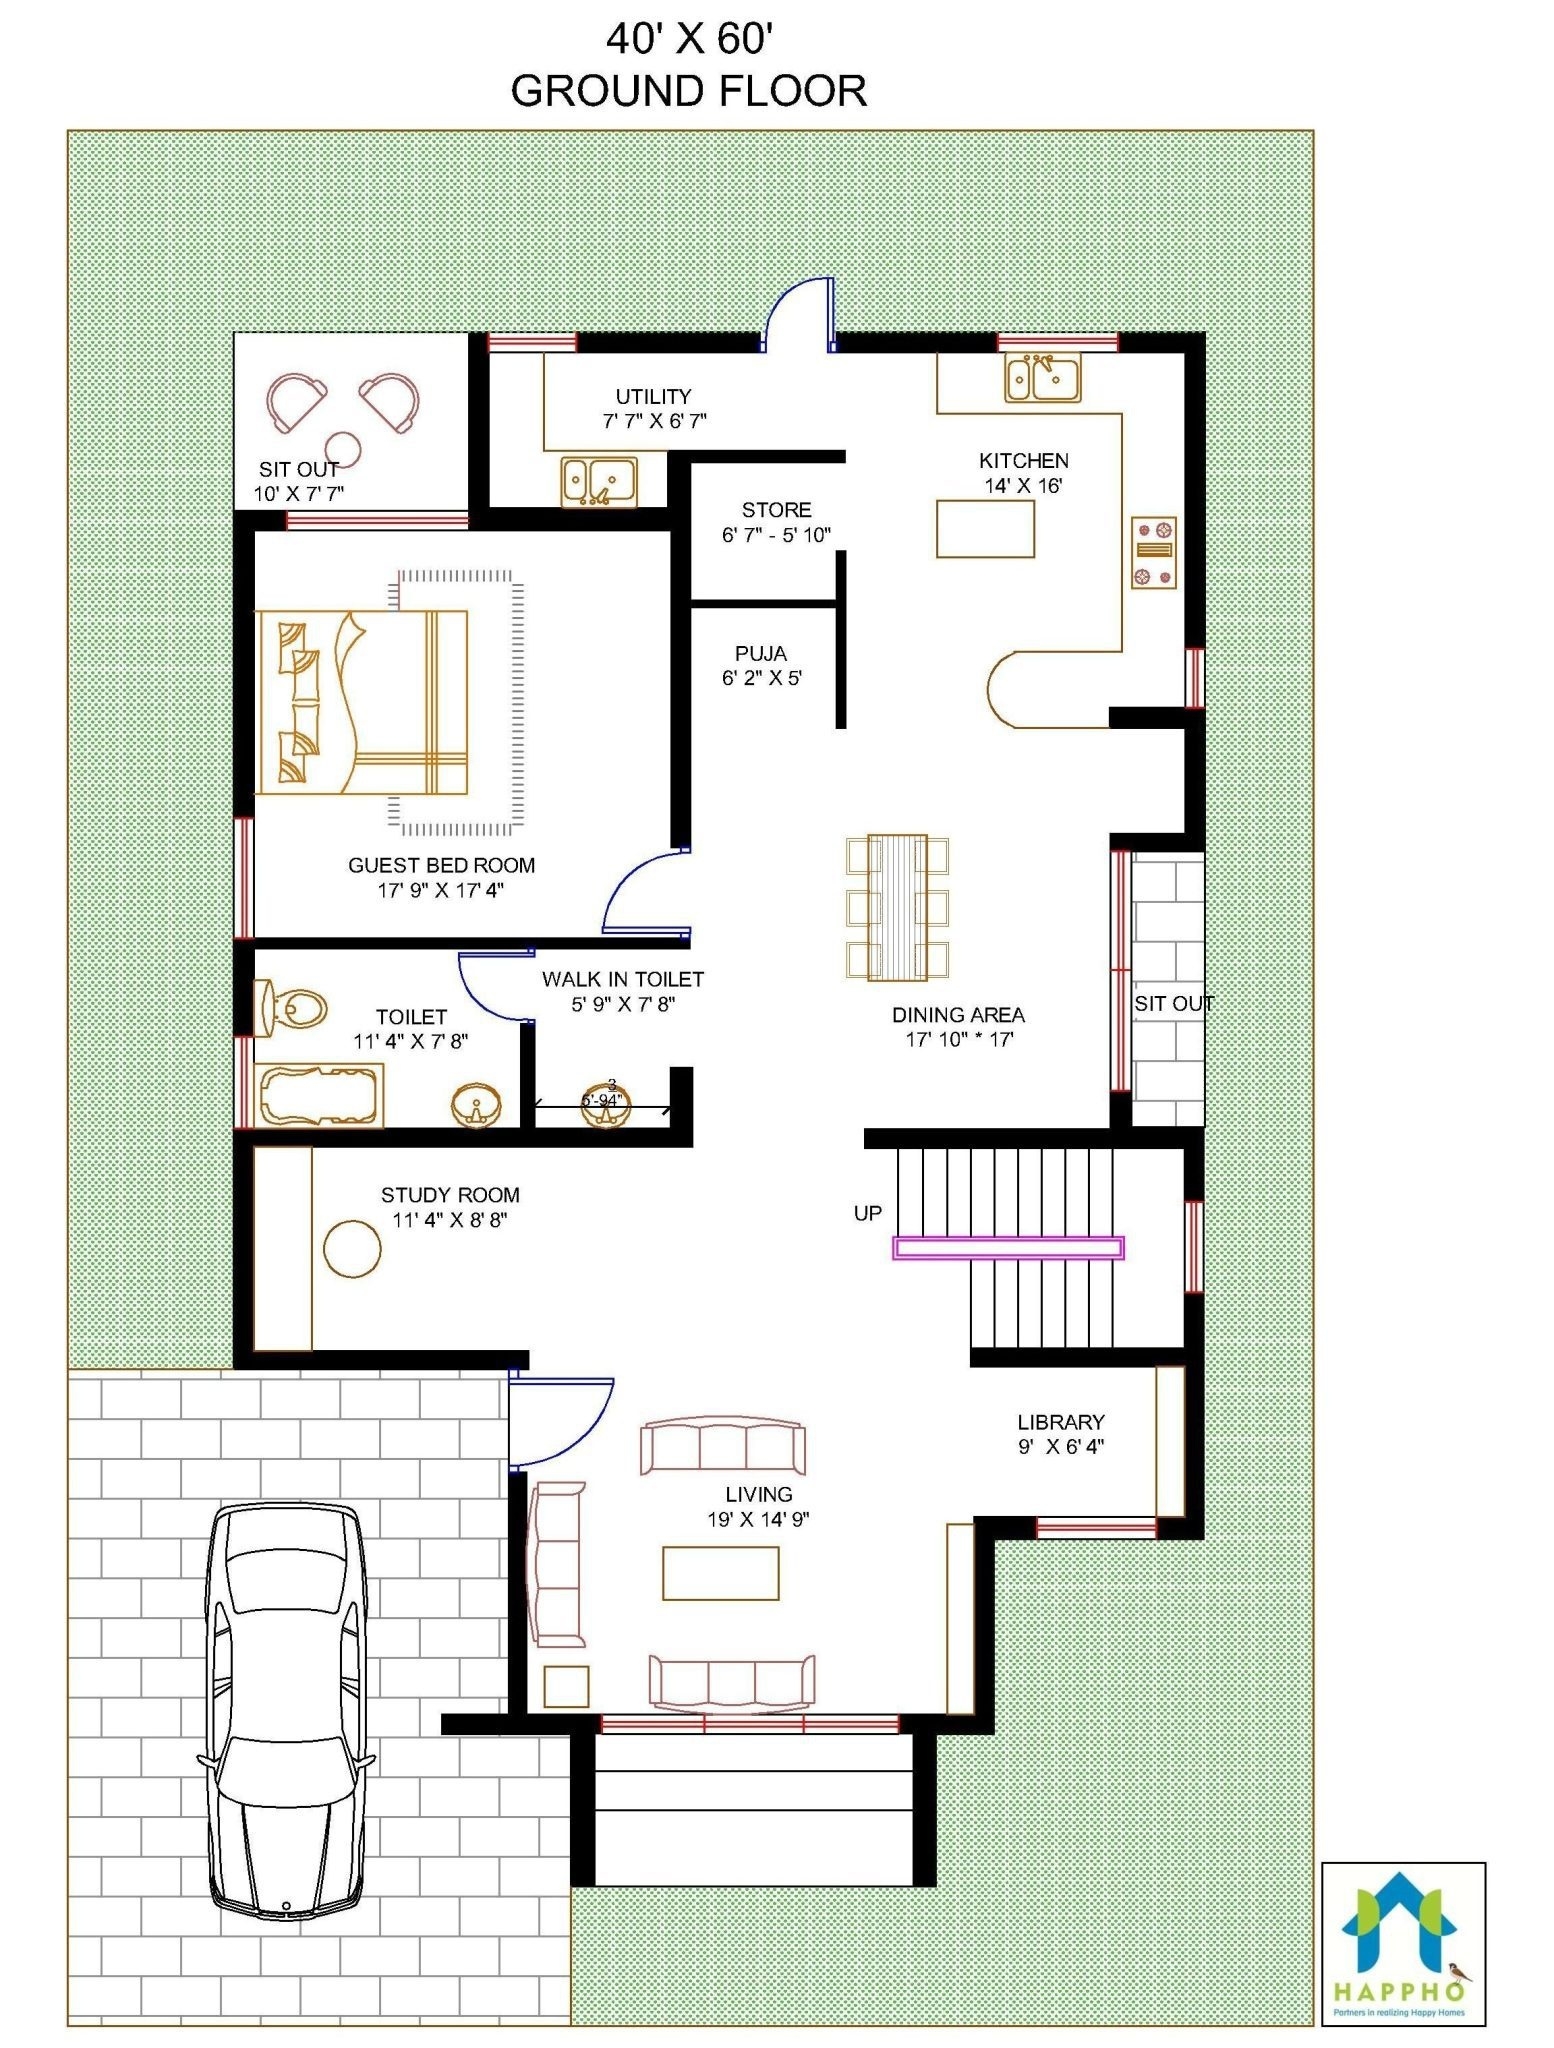 Fascinating floor plan for 40 x 60 feet plot | 3 bhk (2400 square feet/266 sq yards in fantastic house plan for 20 feet by 60 feet plot